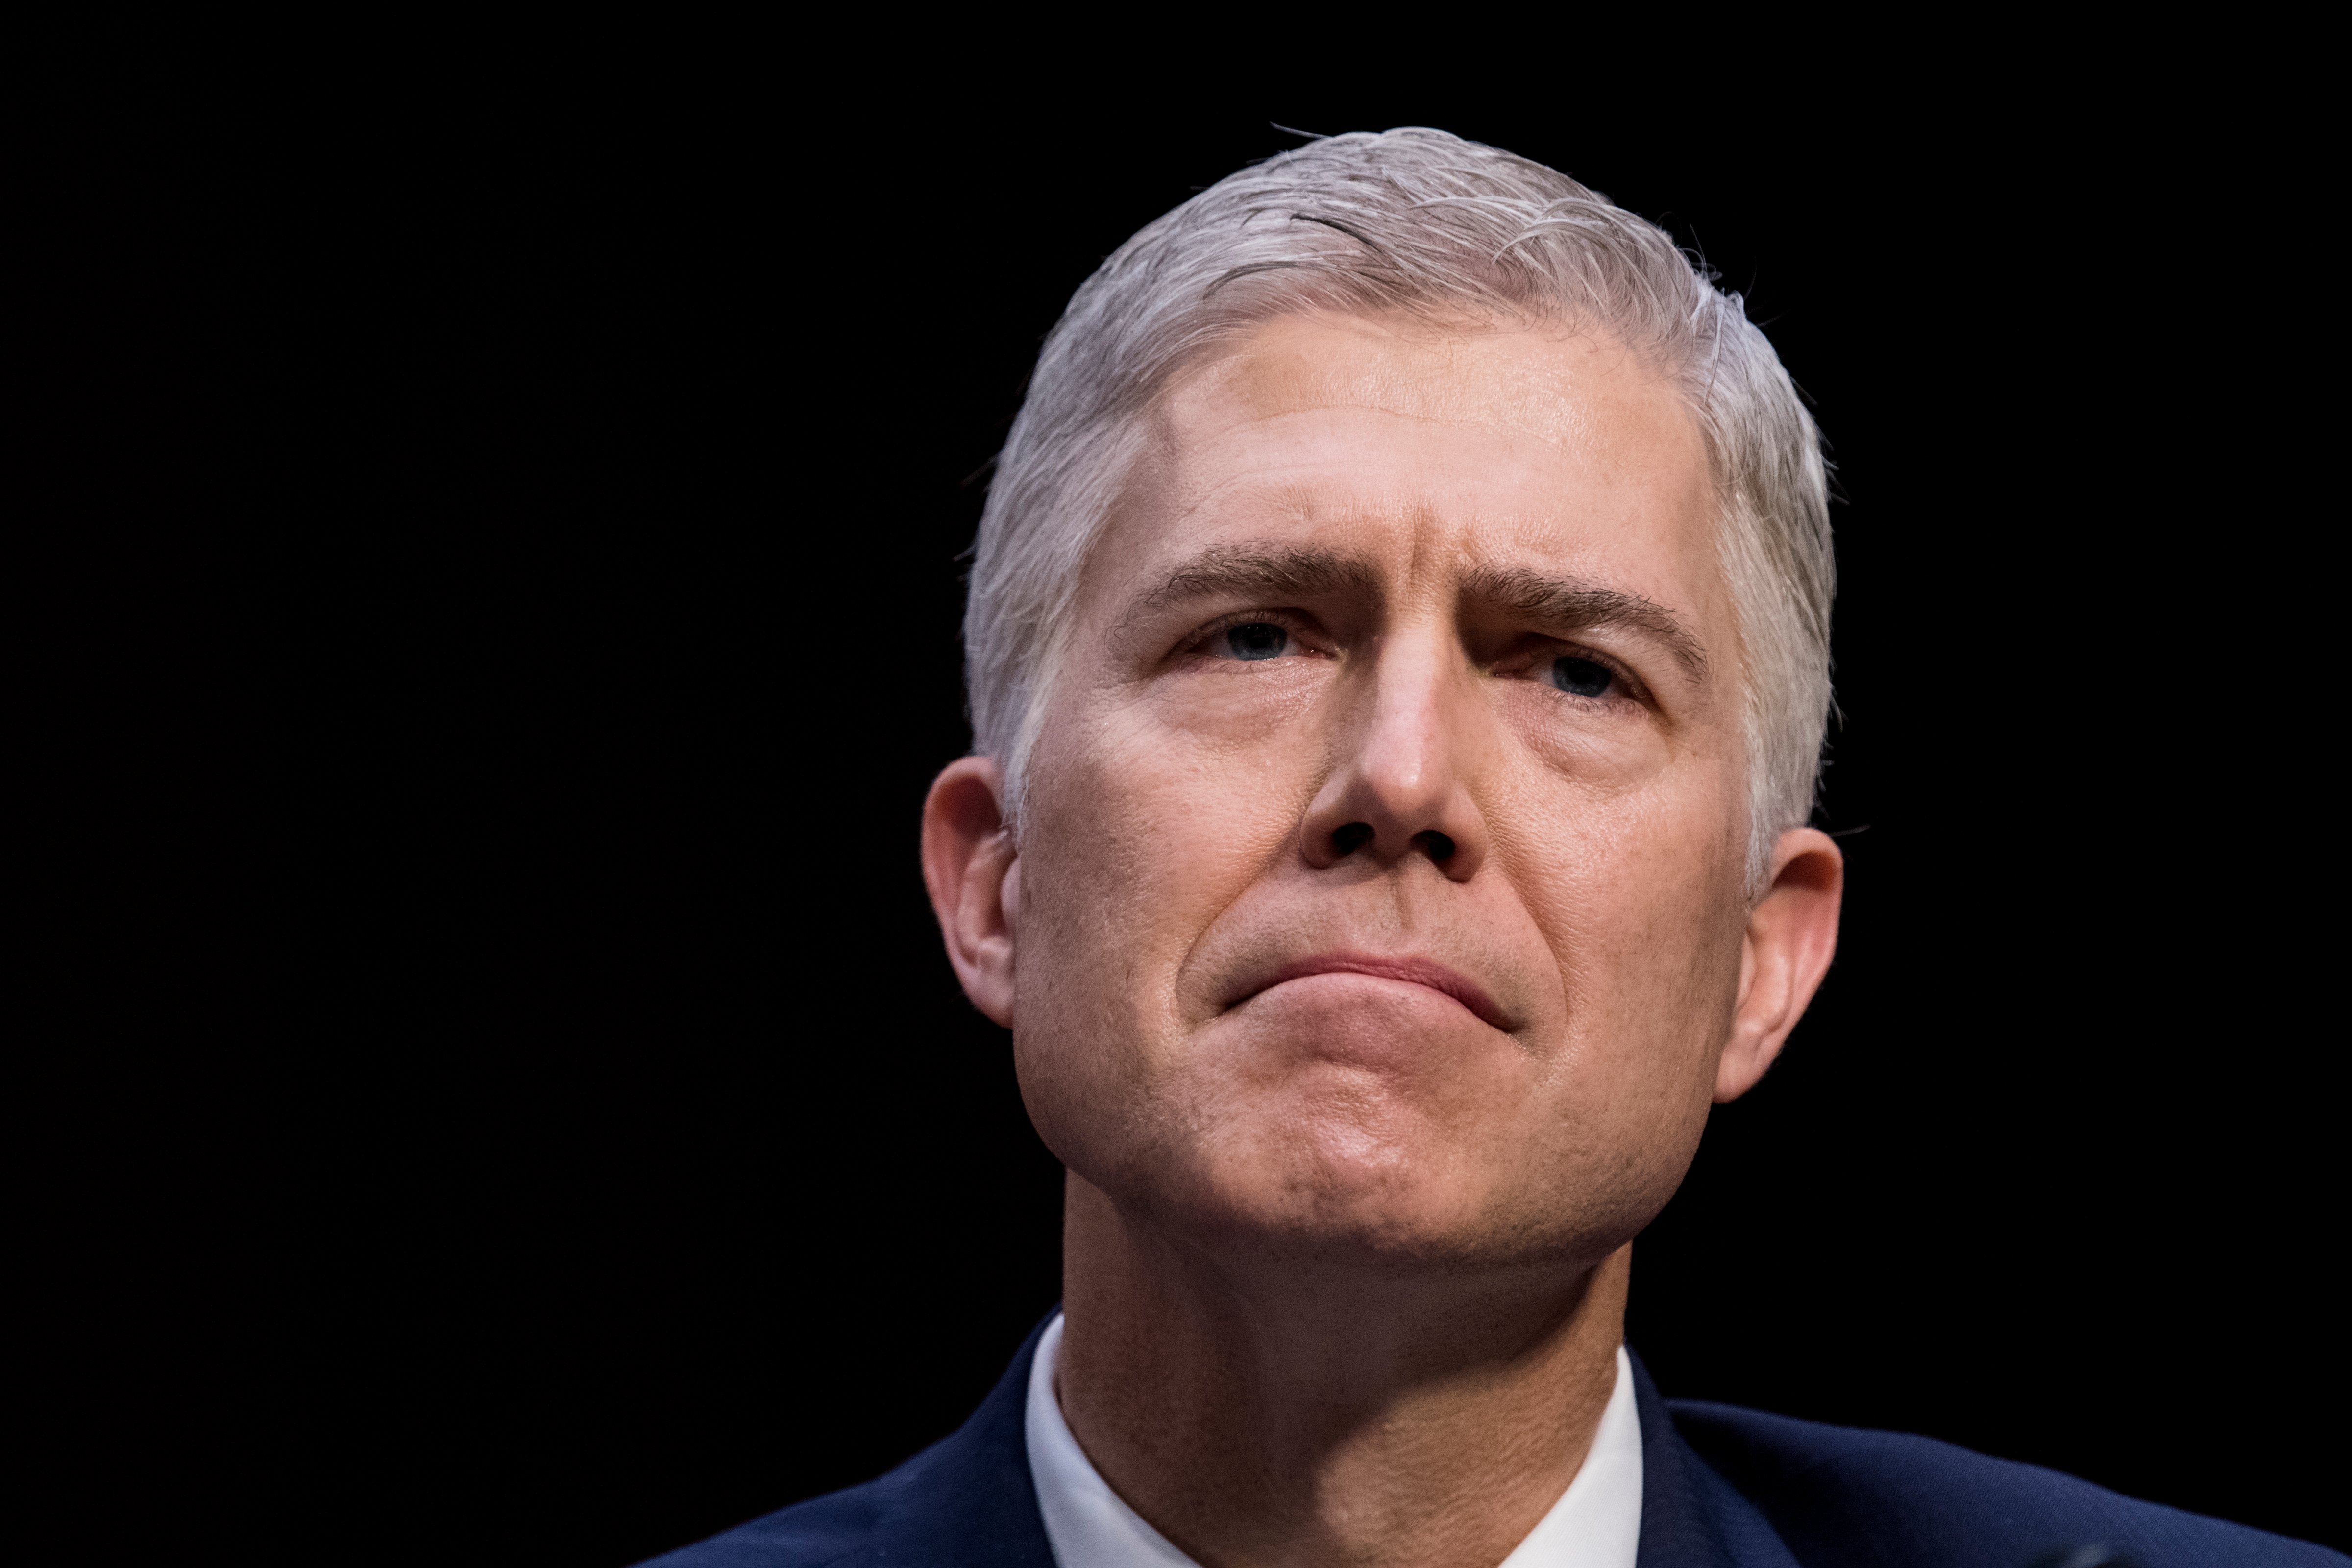 Neil Gorsuch confirmation hearing to be Associate Justice of the U.S. Supreme Court